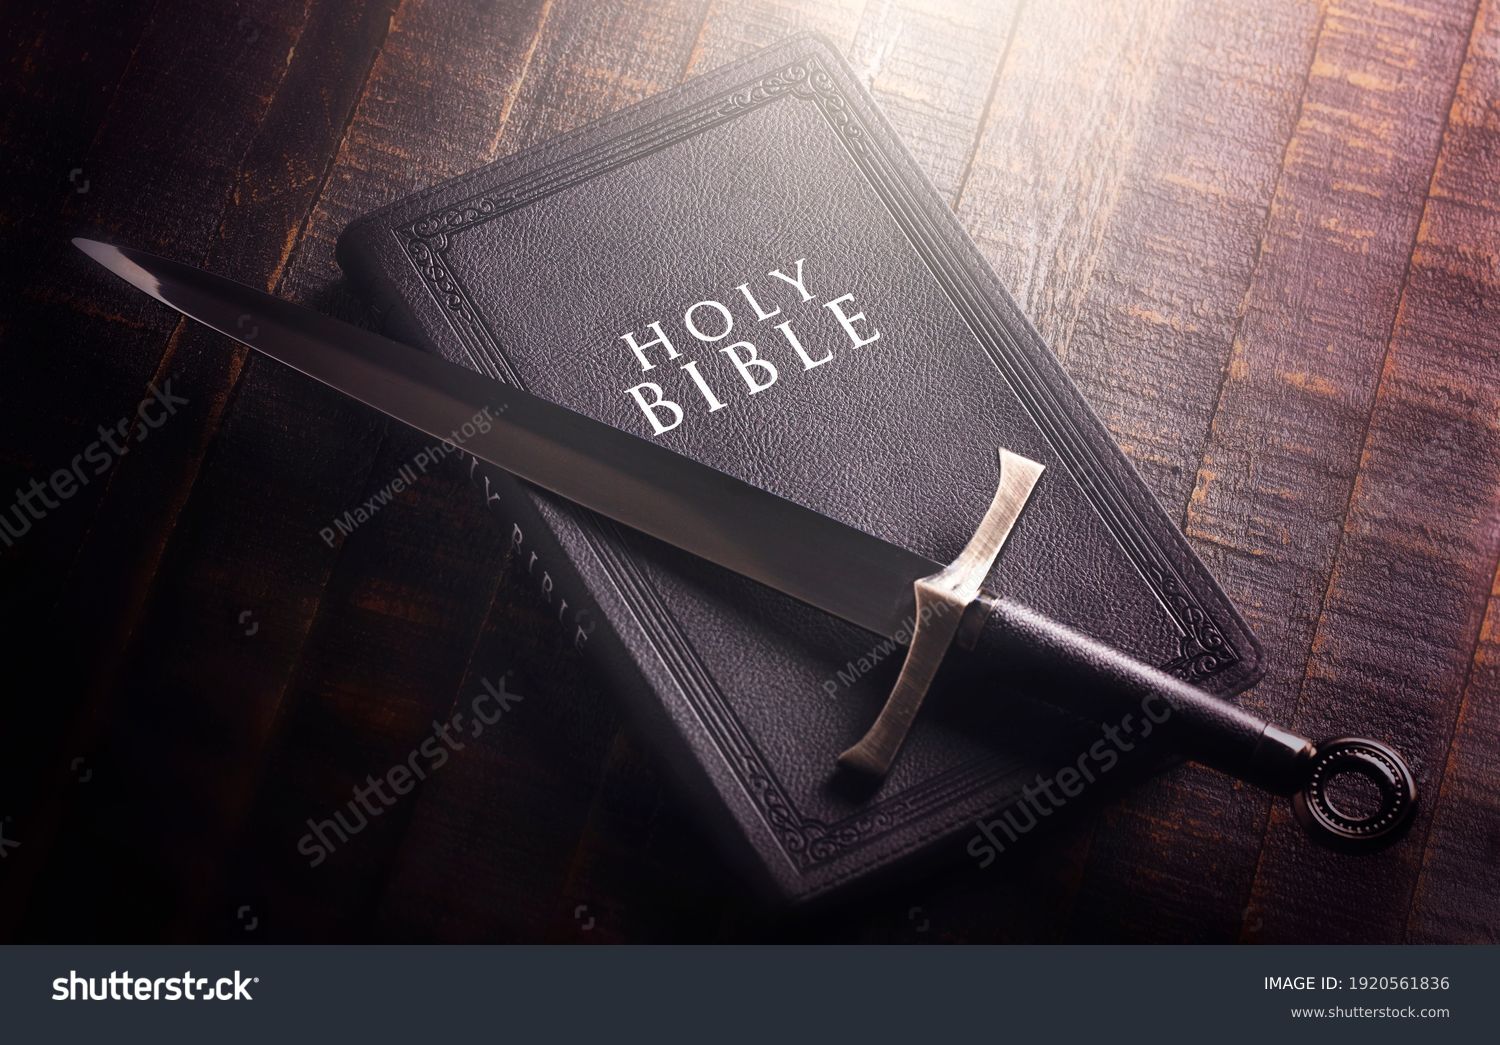 Bible and a Sword on a Dark Wooden Table #1920561836